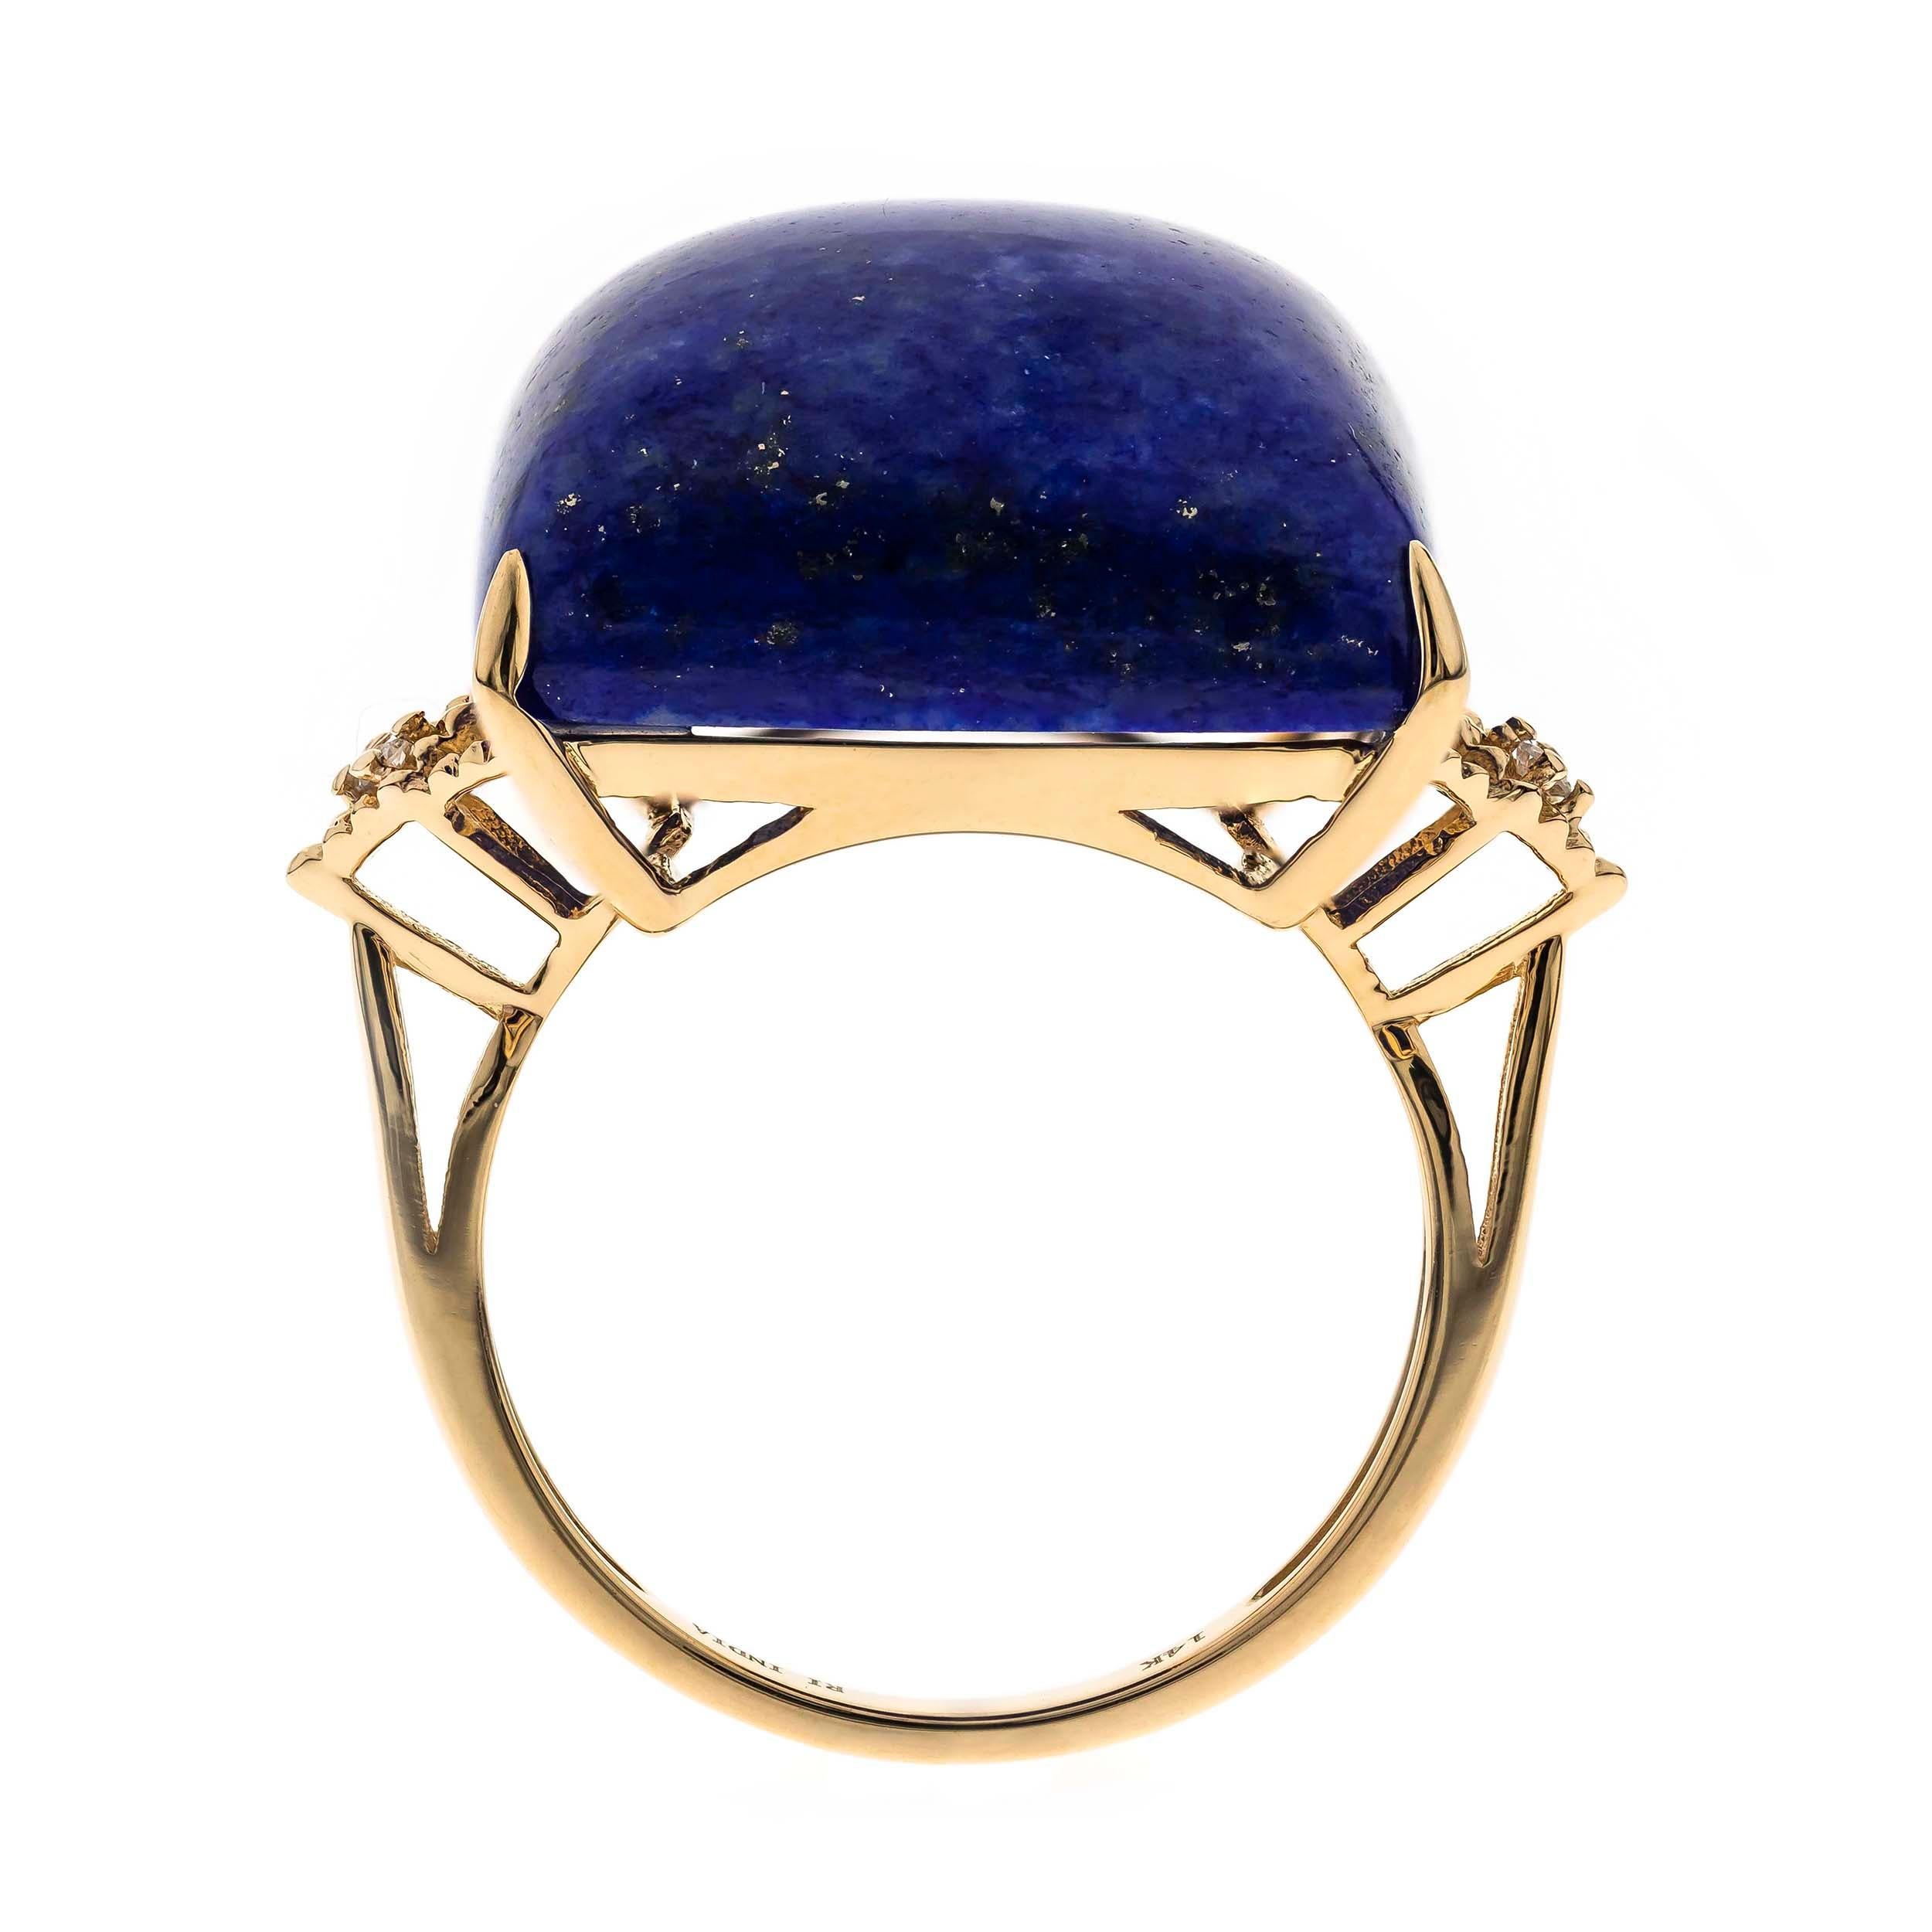 Decorate yourself in elegance with this Ring is crafted from 14-karat Yellow Gold by Gin & Grace. This Ring is made up of 18.0 mm Cushion-Cab (1 pcs) 24.81 carat Lapis and Round-cut White Diamond (2 Pcs) 0.02 Carat. This Ring is weight 2.59 grams.